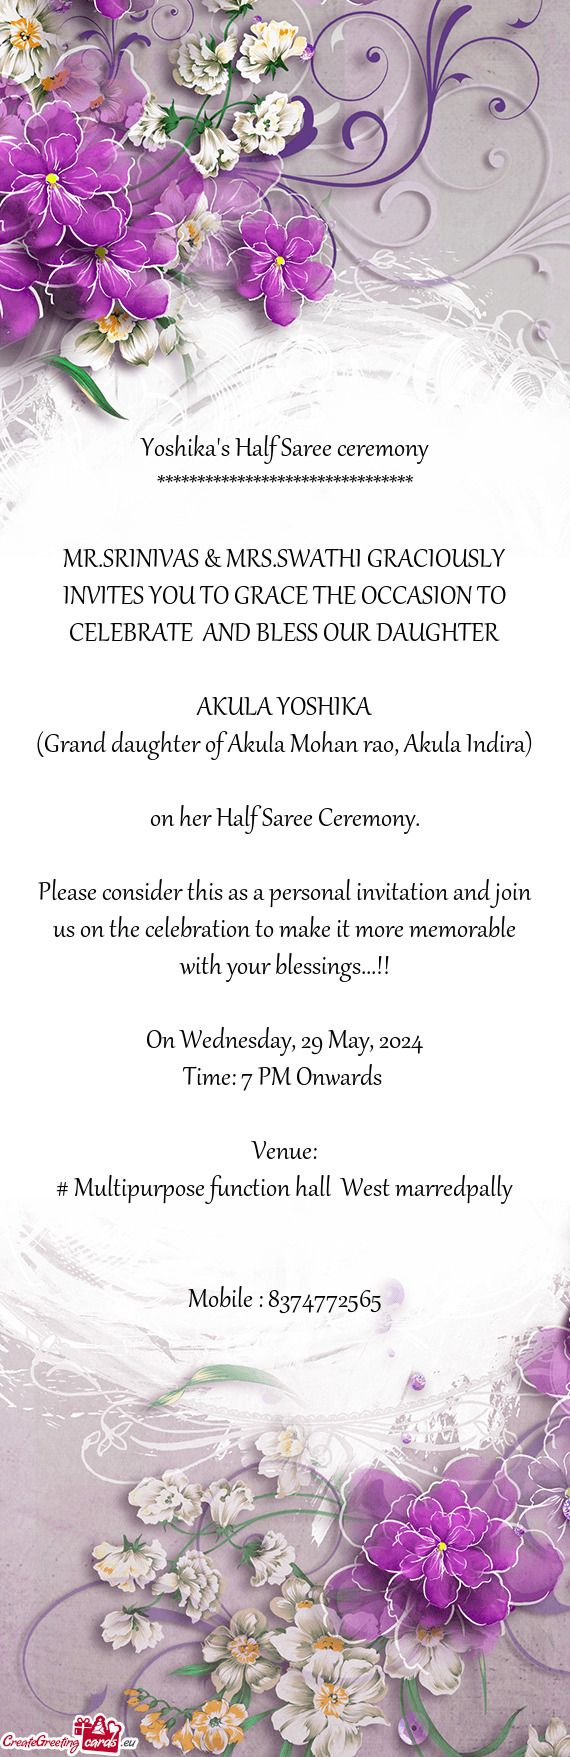 MR.SRINIVAS & MRS.SWATHI GRACIOUSLY INVITES YOU TO GRACE THE OCCASION TO CELEBRATE AND BLESS OUR DA